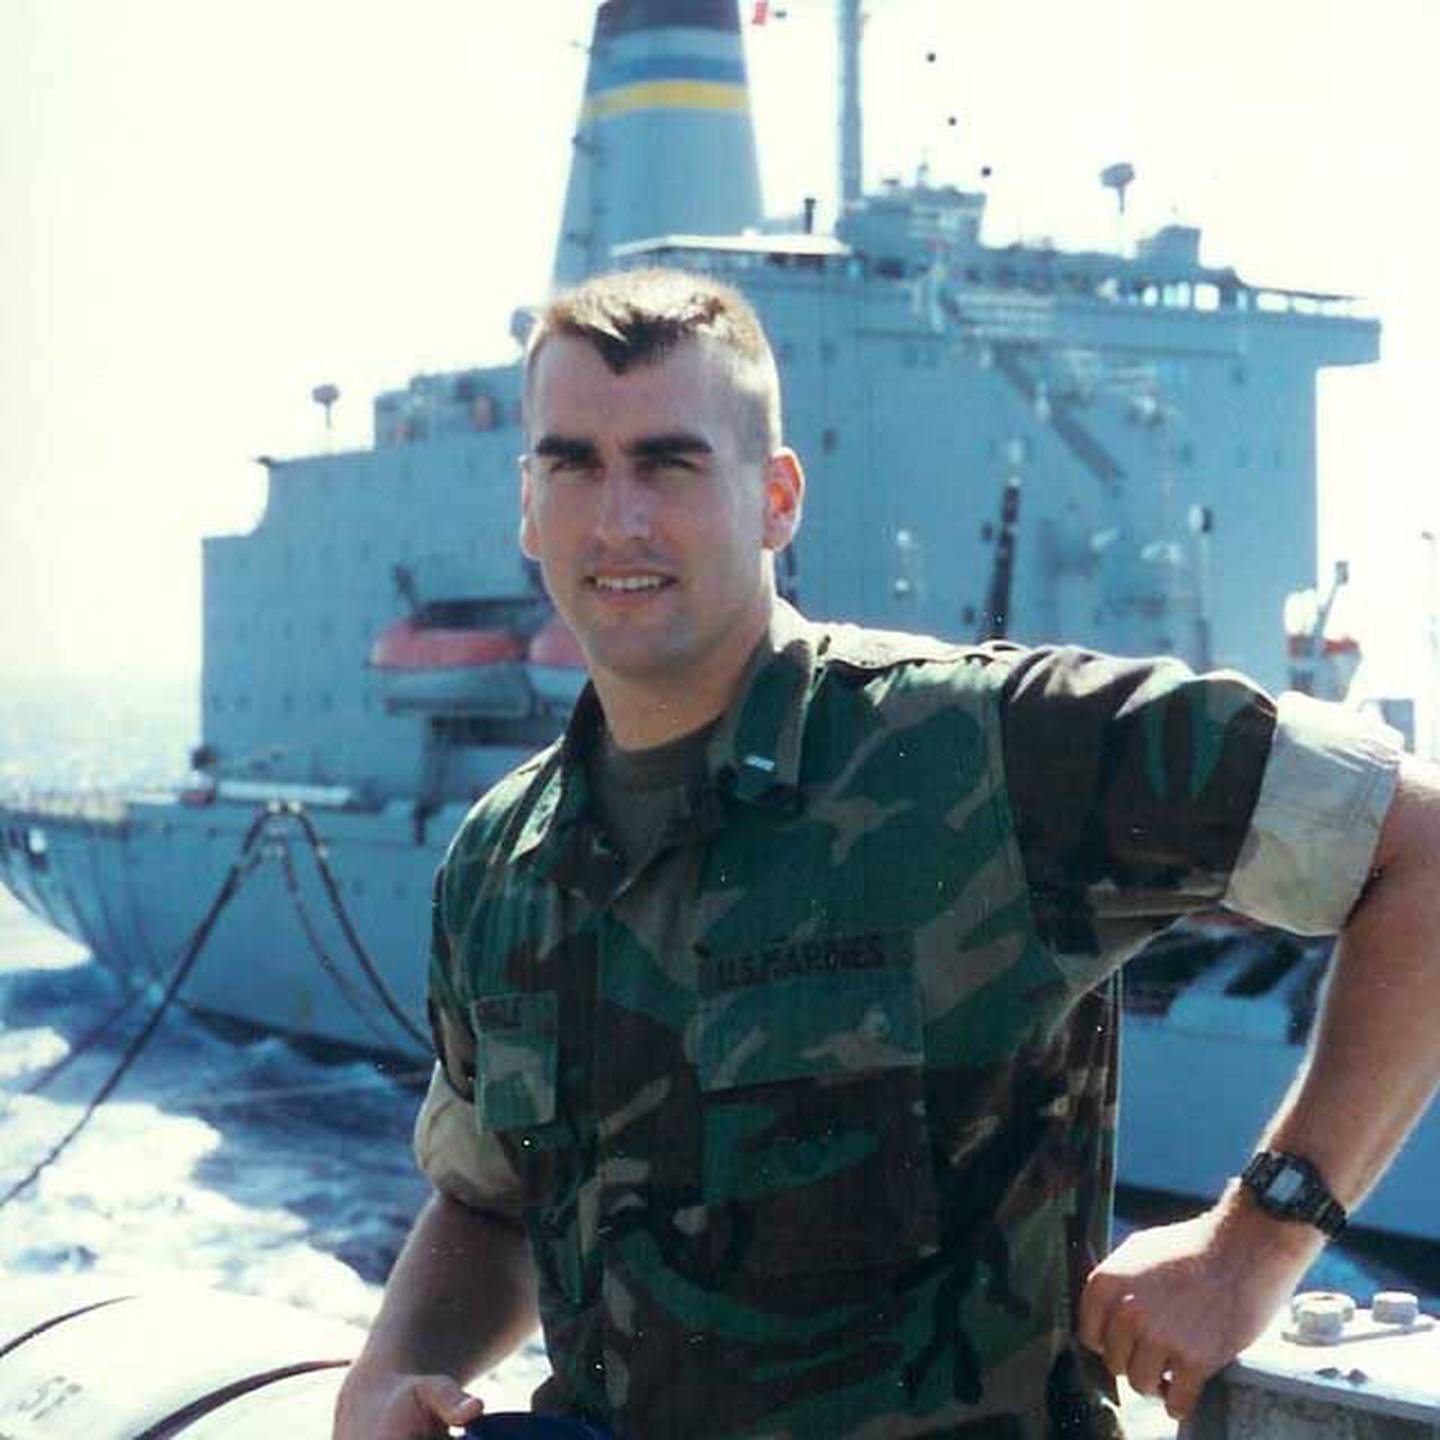 'The Hangover' actor captioned this Facebook post: '1st Lt. Rob Riggle on his way to Liberia circa '96. Refuelling at sea.' Photo: @Rob Riggle / Facebook